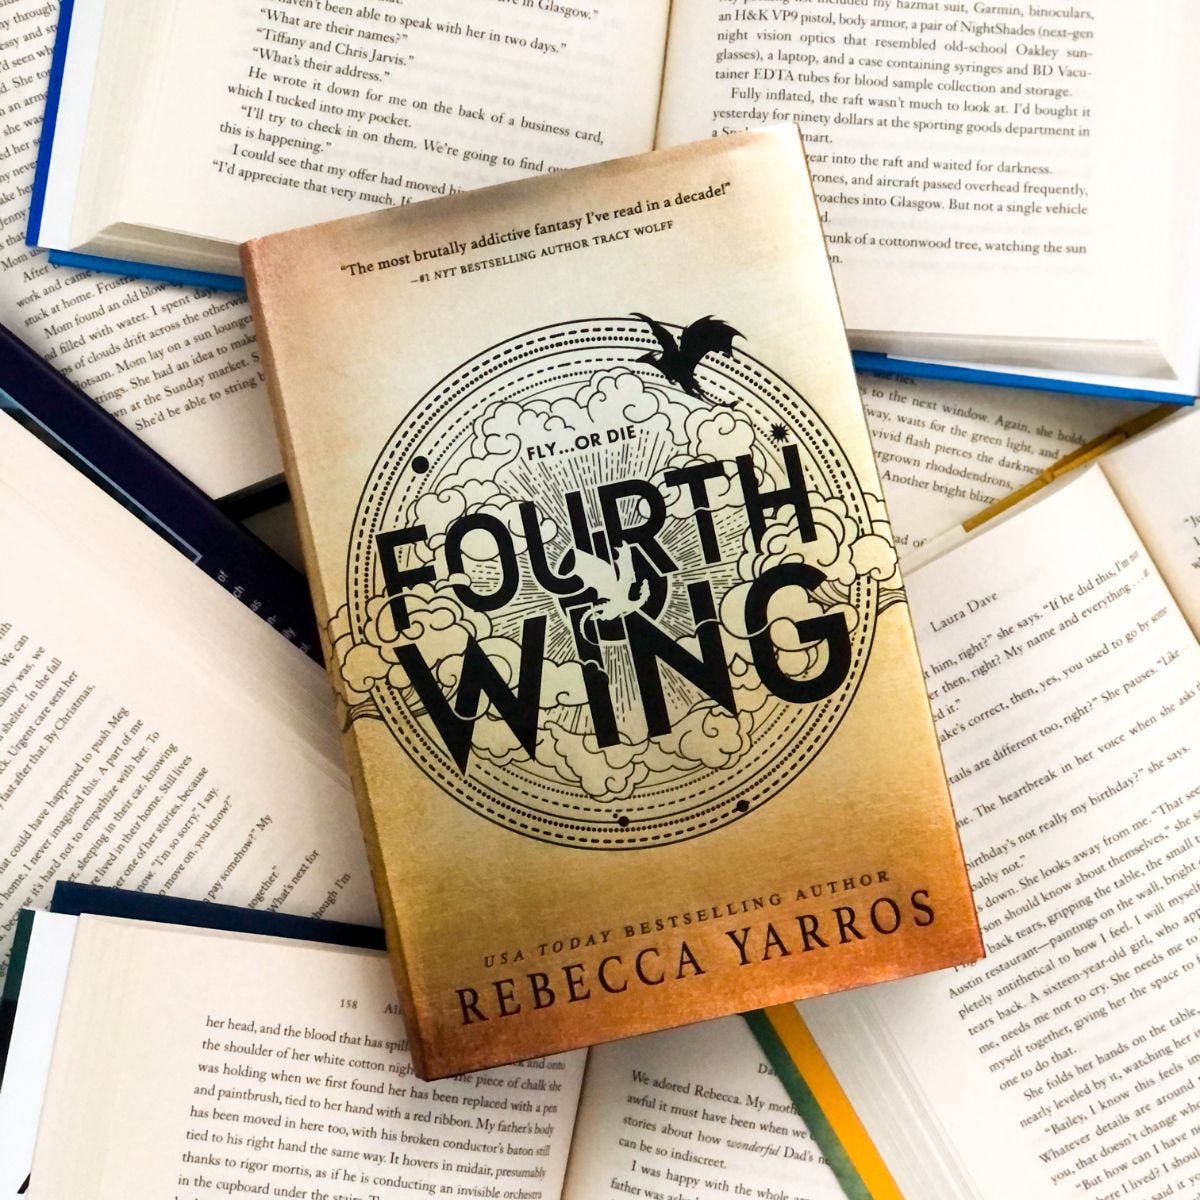 Fourth Wing & The Empyrean Series by Rebecca Yarros